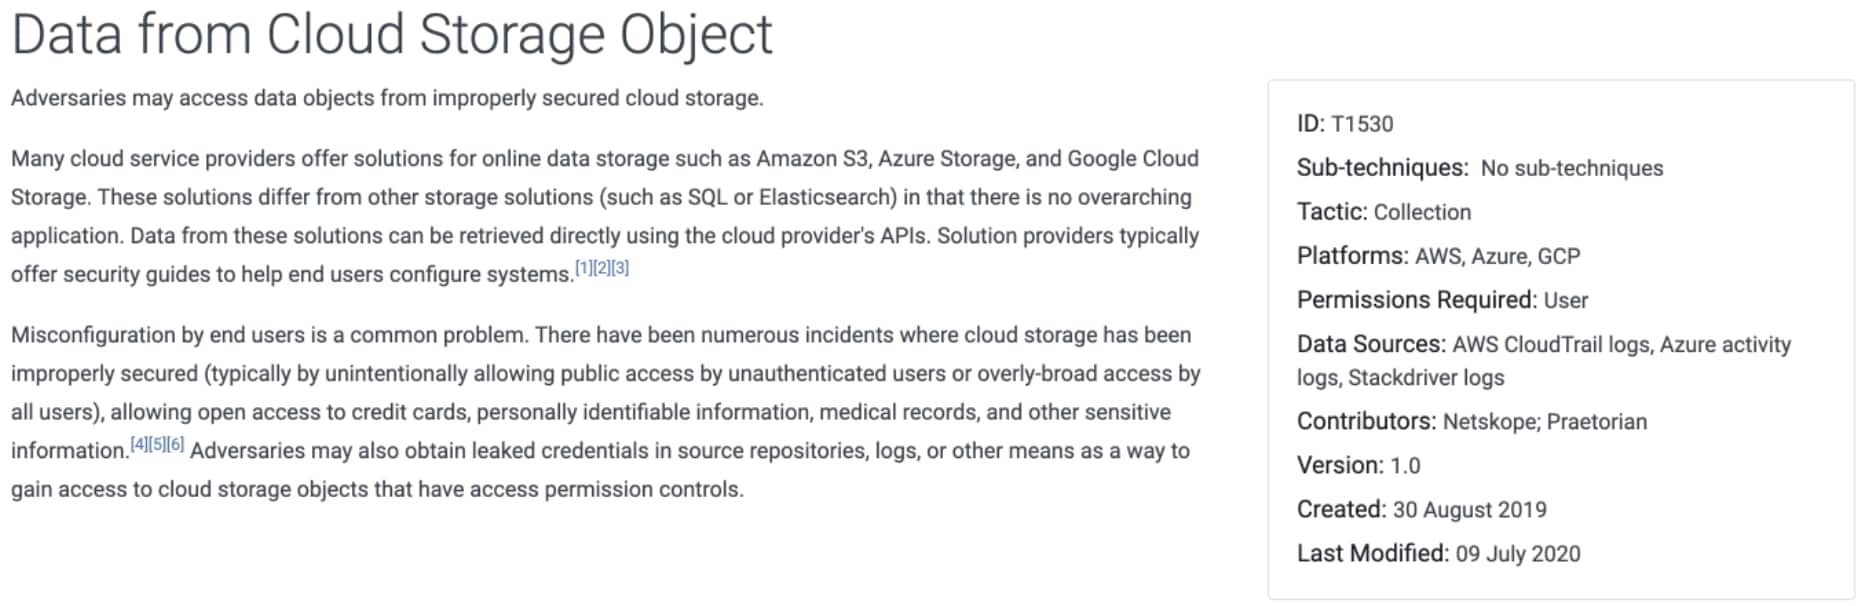 Data from cloud storage object